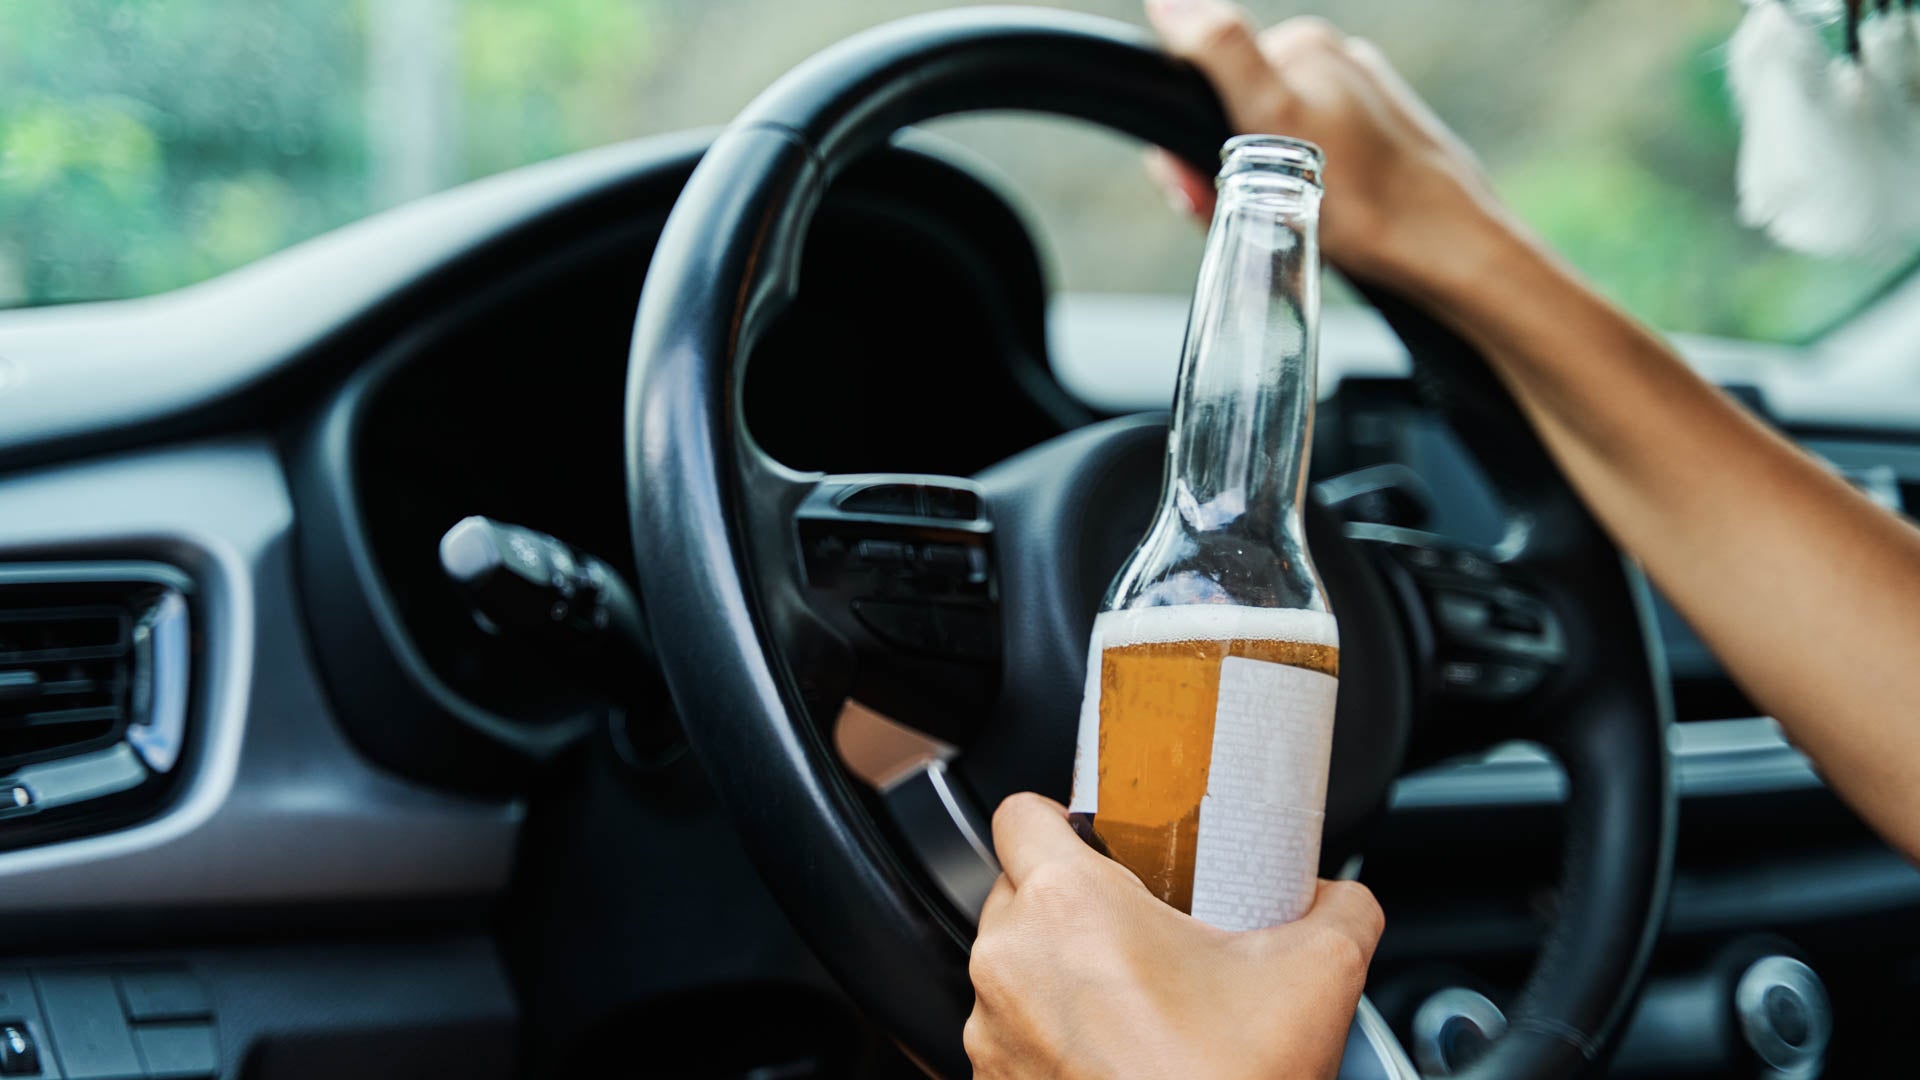 NHTSA and GM want to mandate the technology to end drunk driving